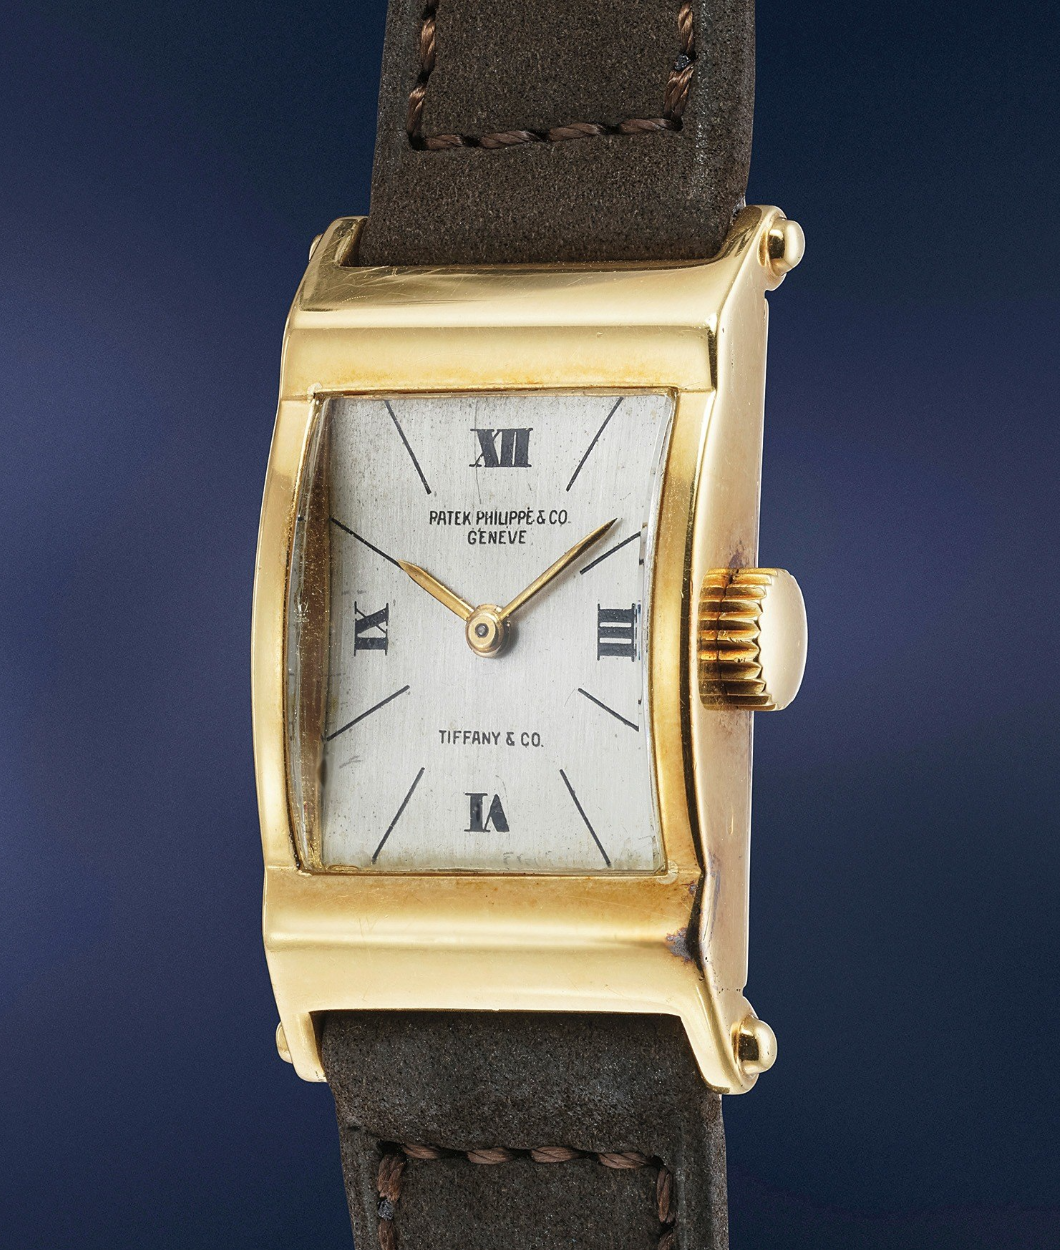 bargains at Phillips Geneva Watch Auction XII